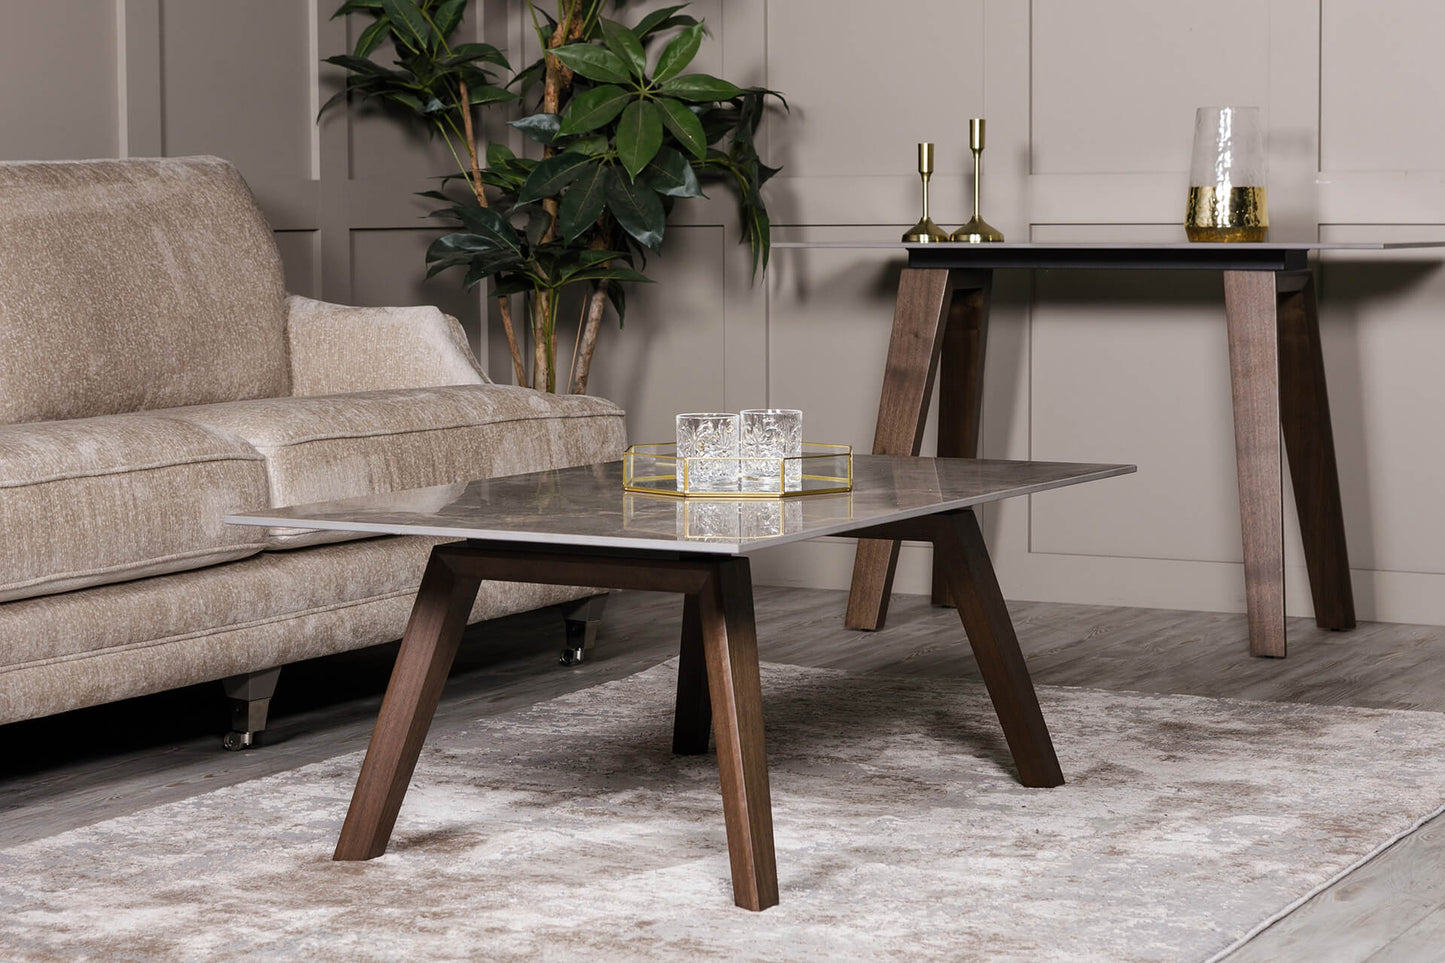 Axton Coffee Table - Latte